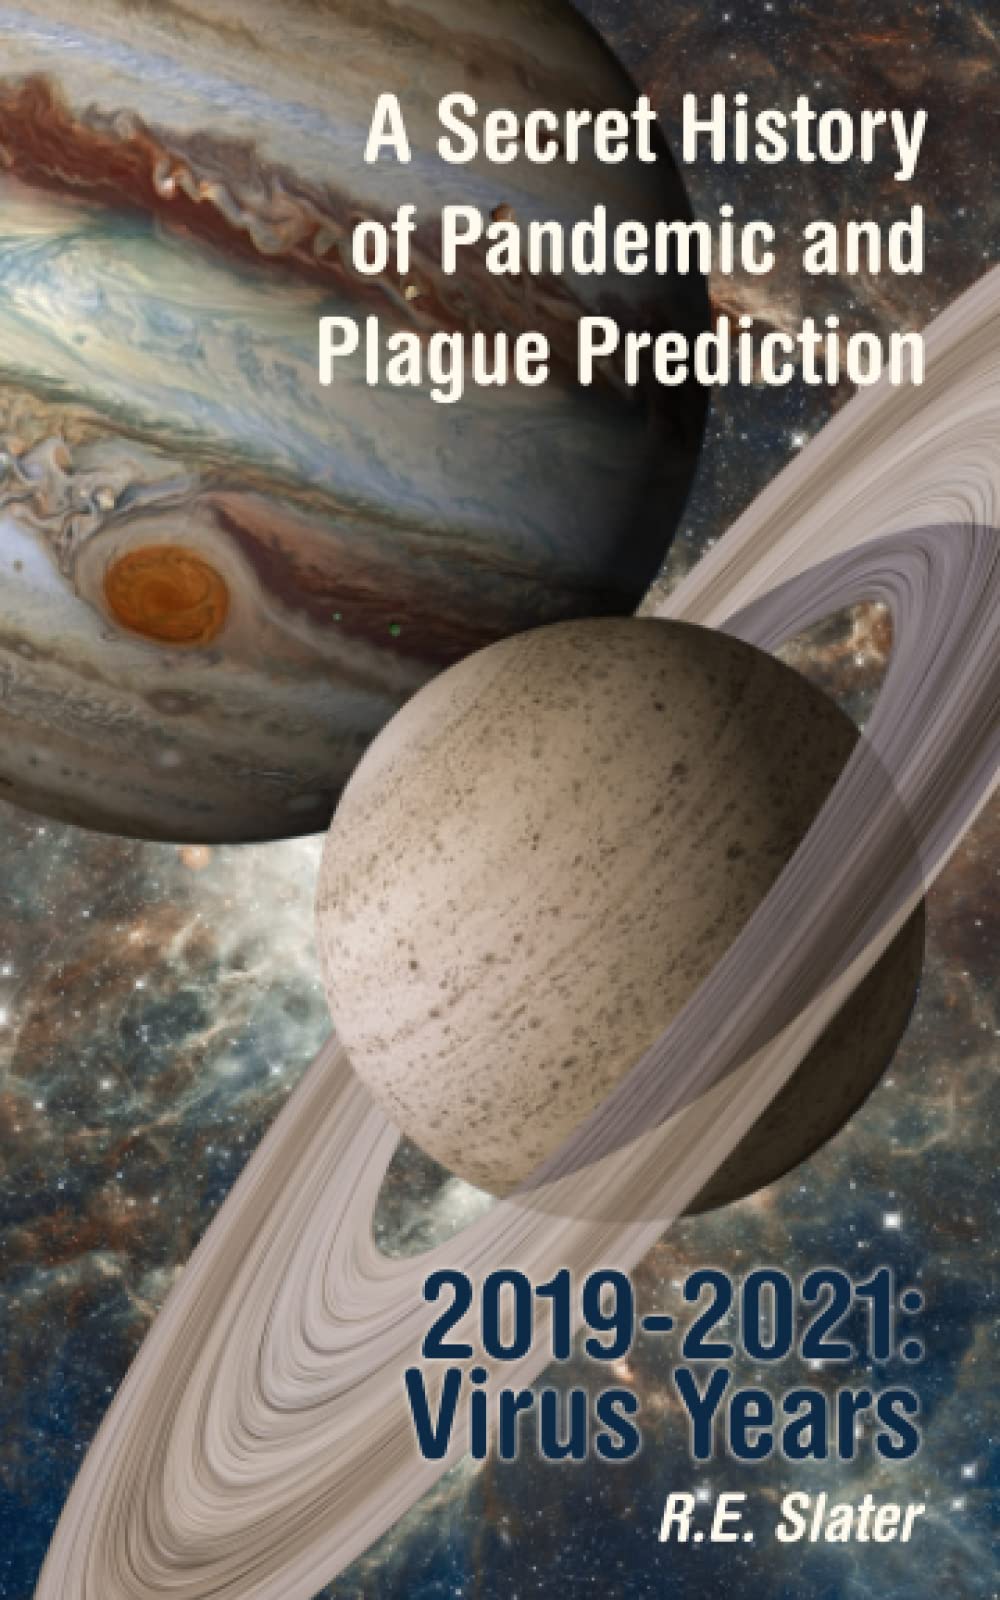 A Secret History of Pandemic and Plague Prediction